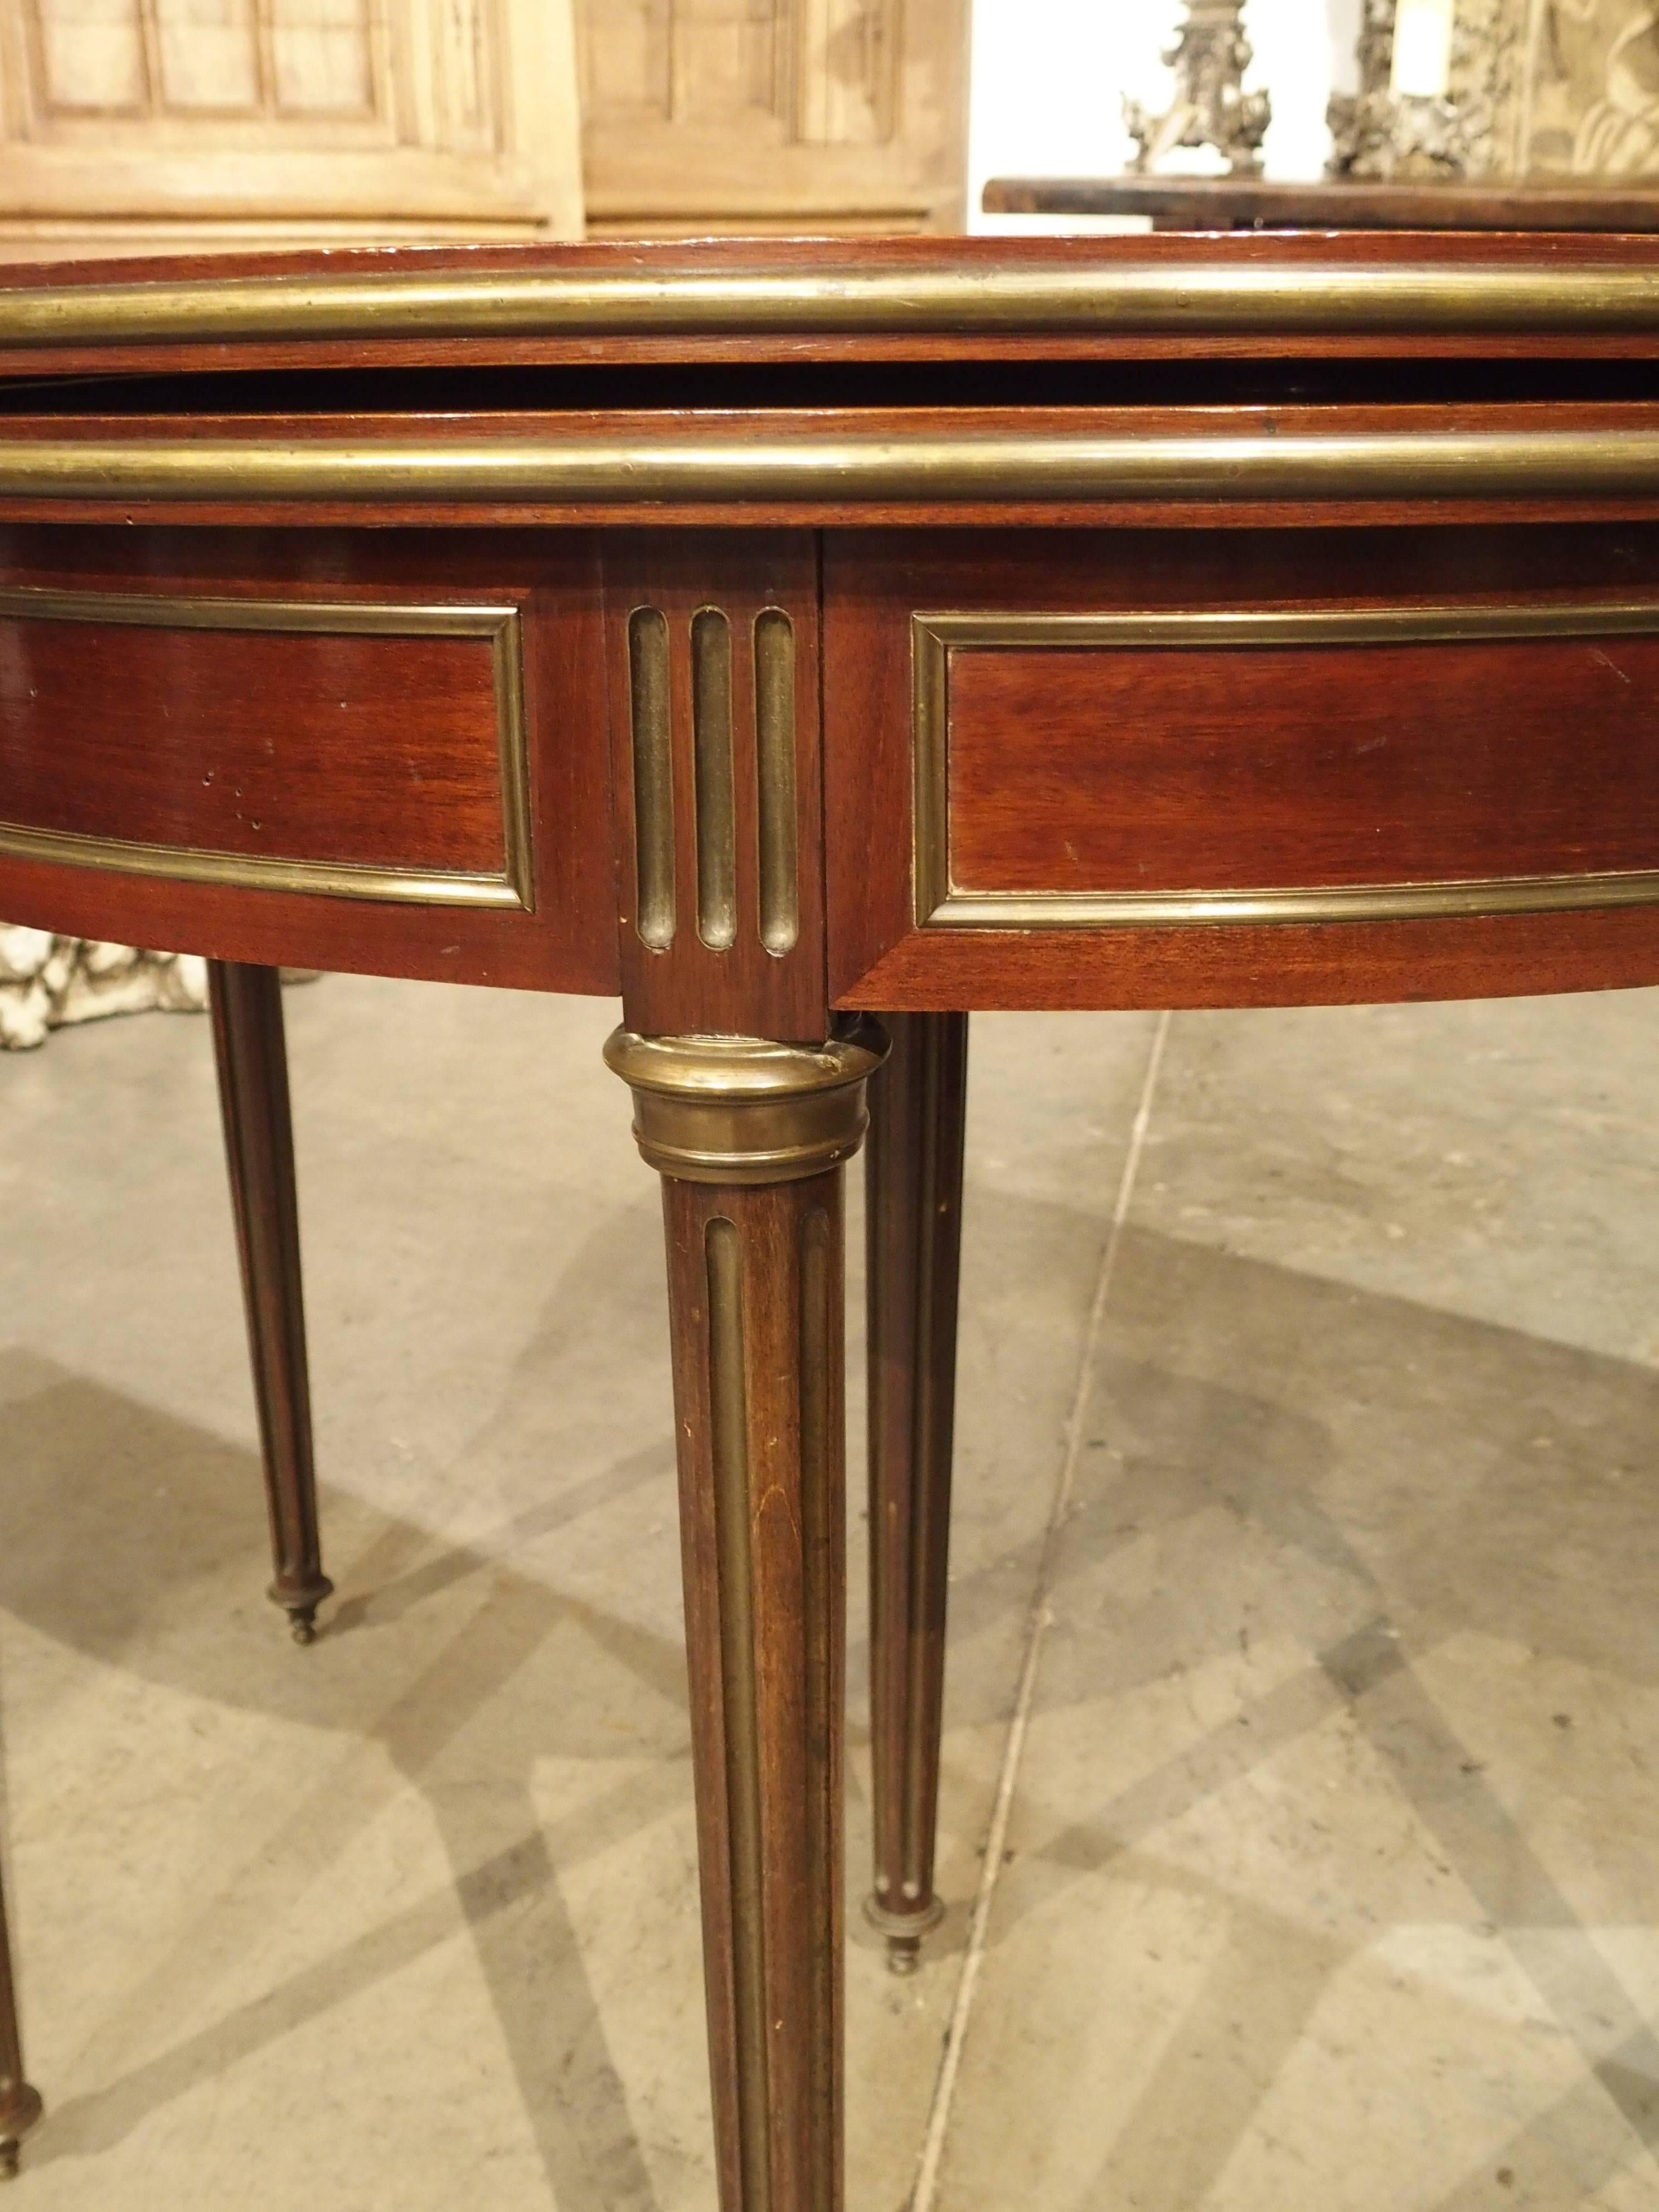 This versatile mahogany and bronze antique French game table can be used closed as a console or open for a game table. It is in the Louis XVI Style and has a half round molding of bronze around the top. The demilune opens to a circle and a felt